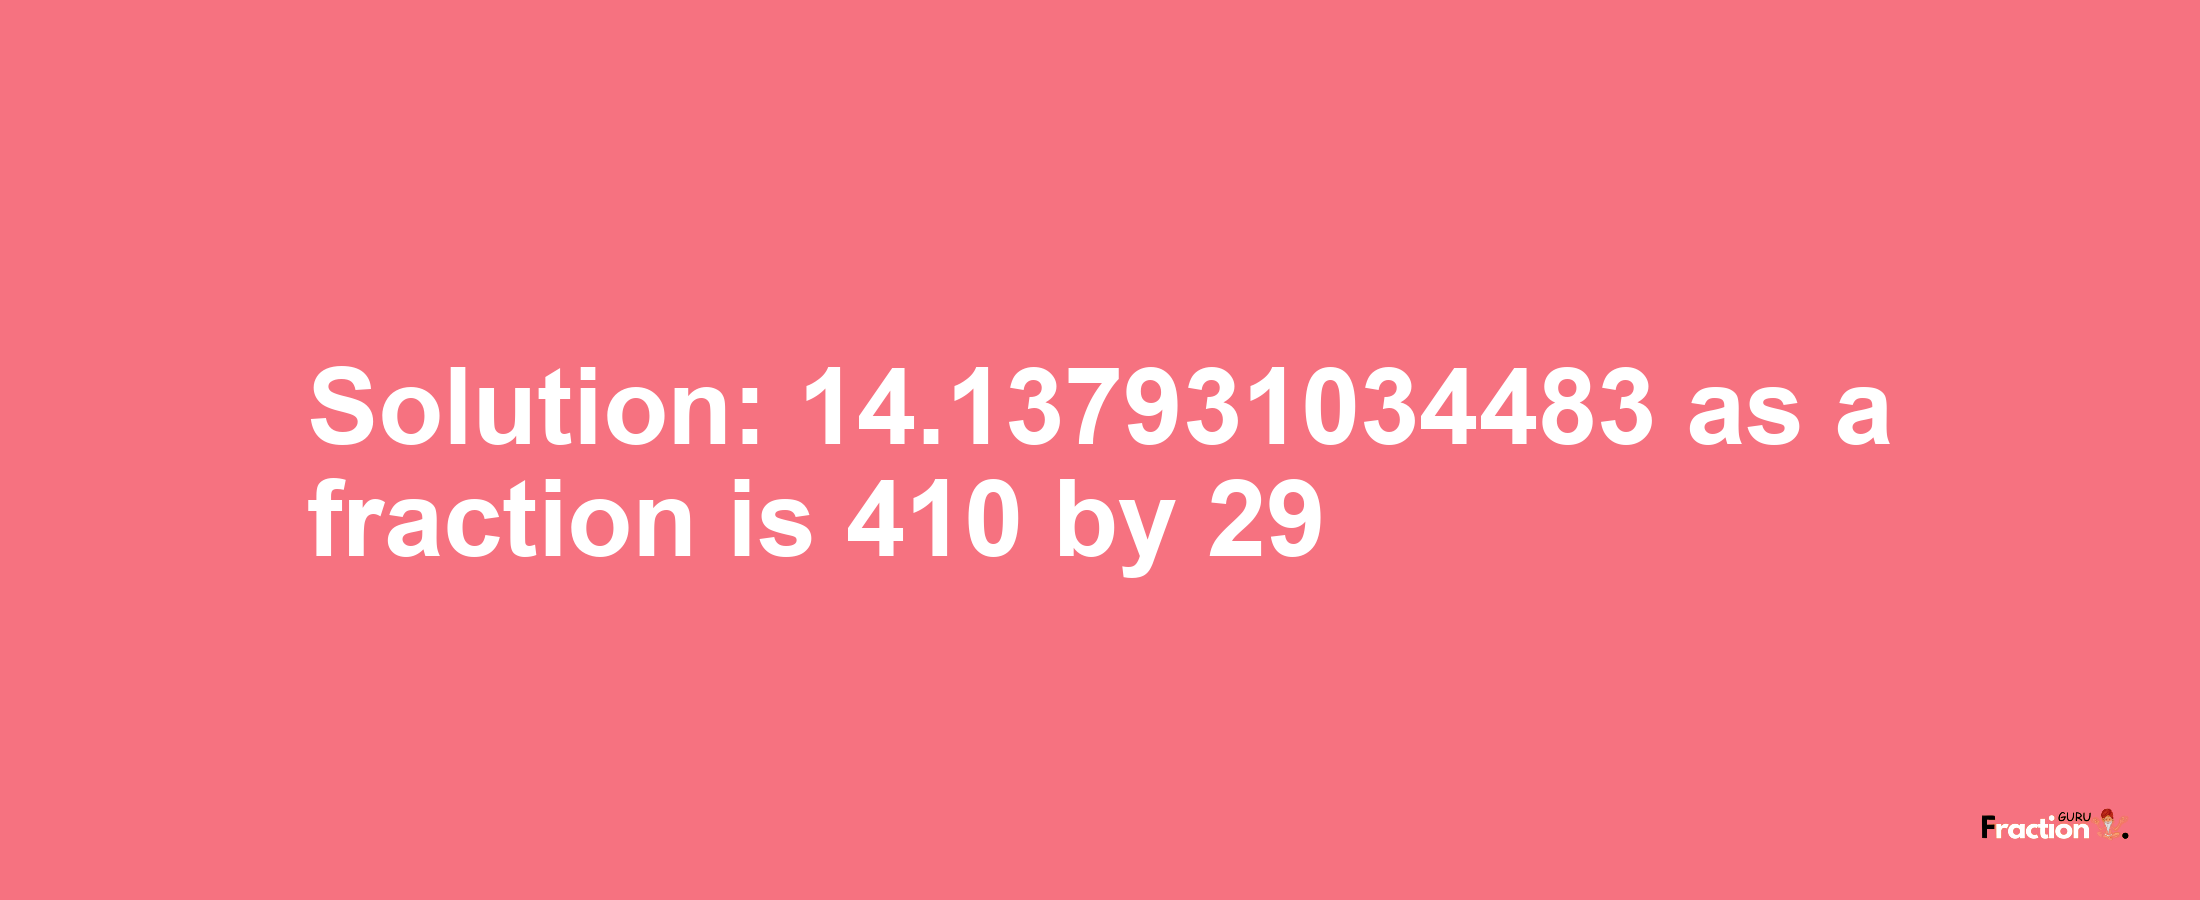 Solution:14.137931034483 as a fraction is 410/29